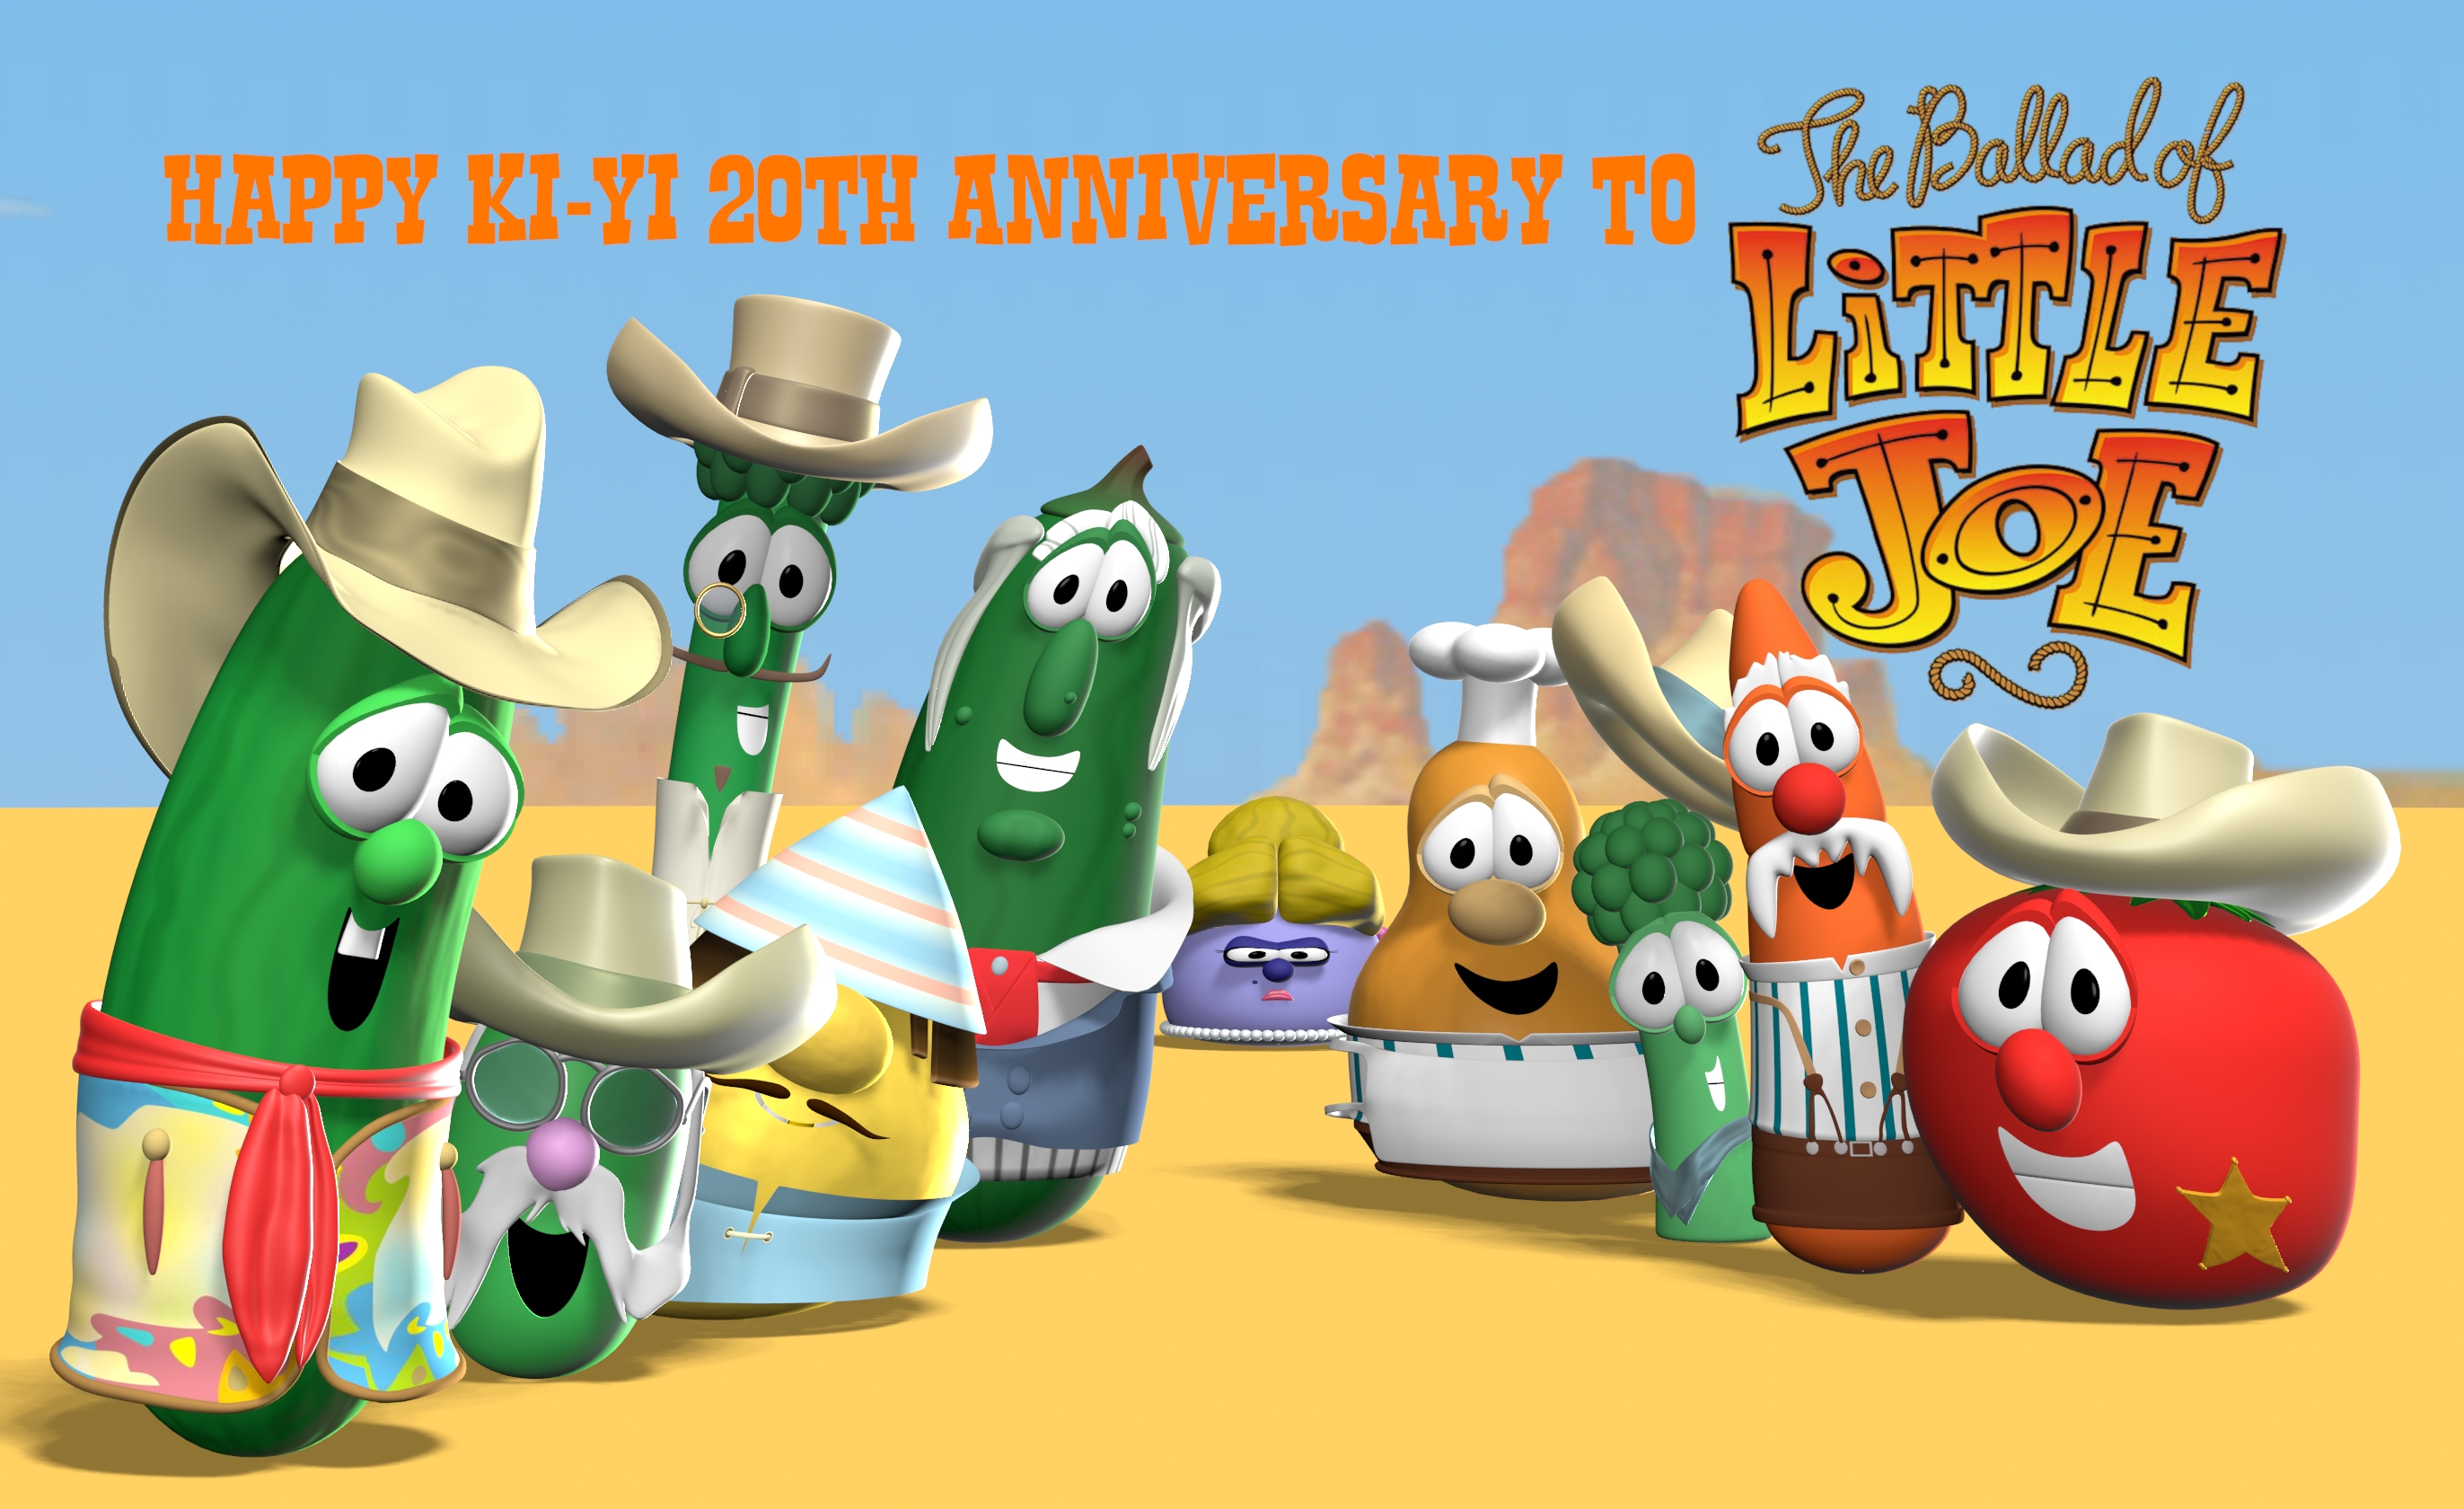 The 20th Anniversary to The Ballad of Little Joe by asherbuddy on